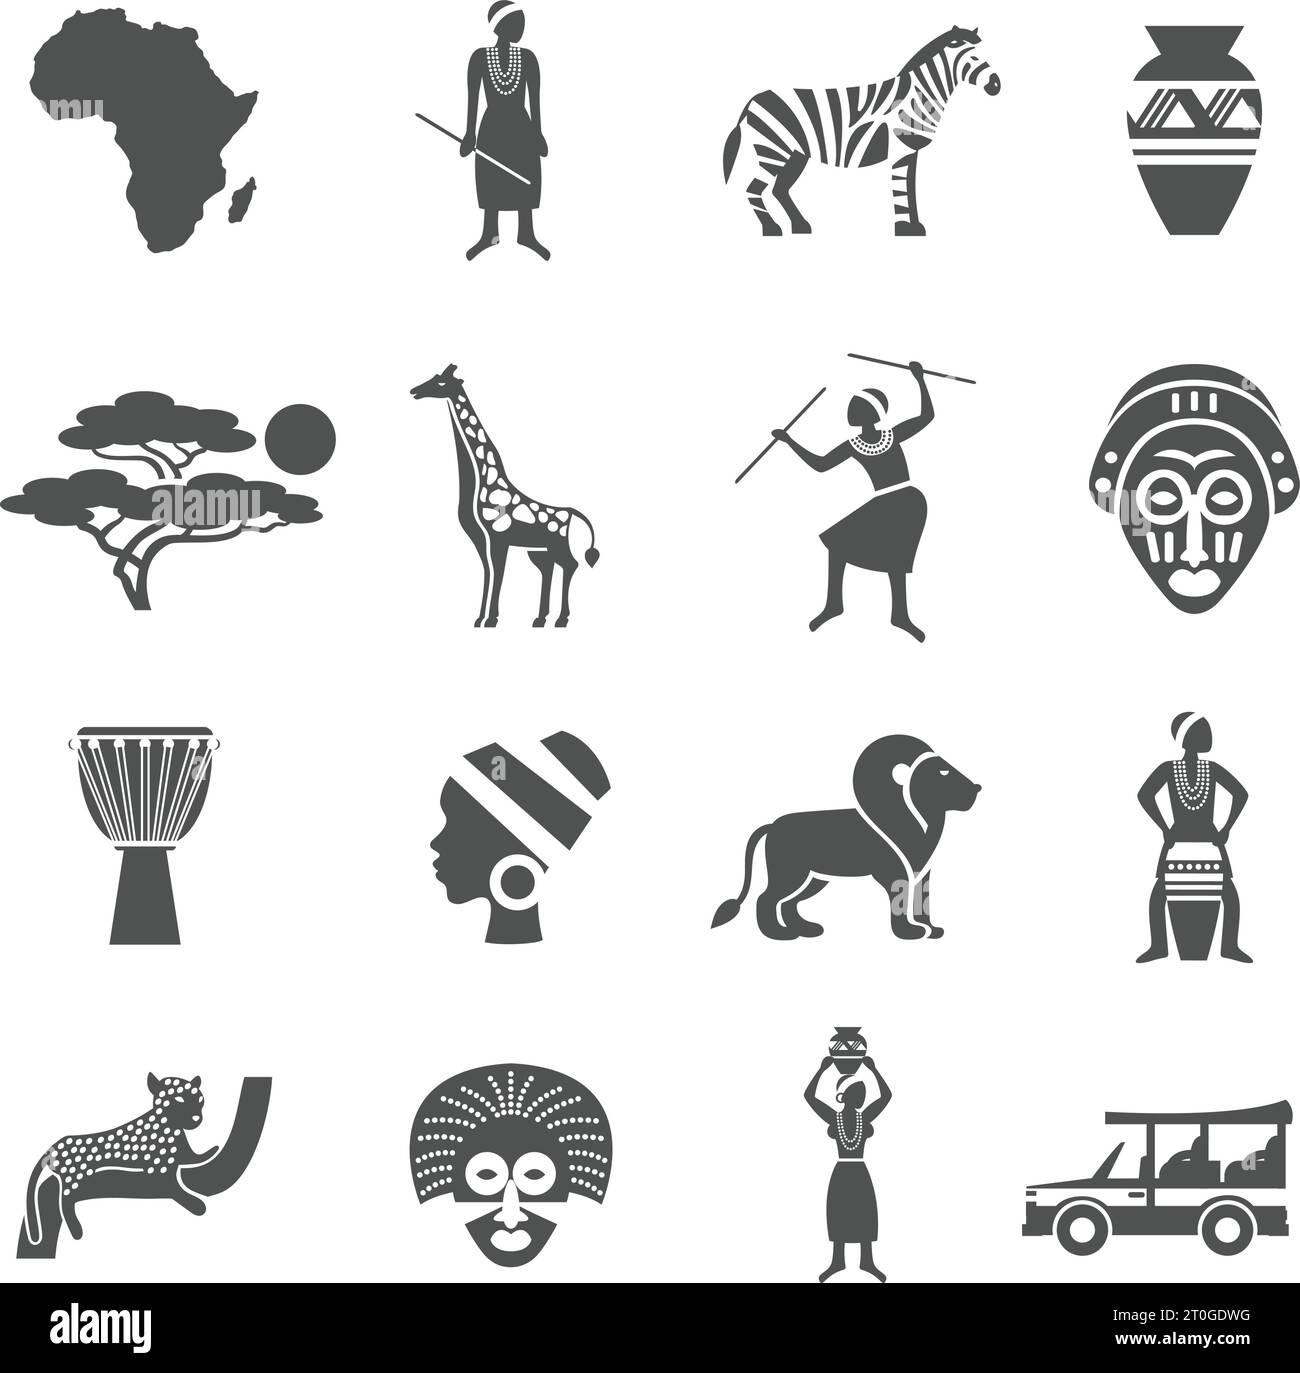 Africa black white icons set with african people and animals flat isolated vector illustration Stock Vector